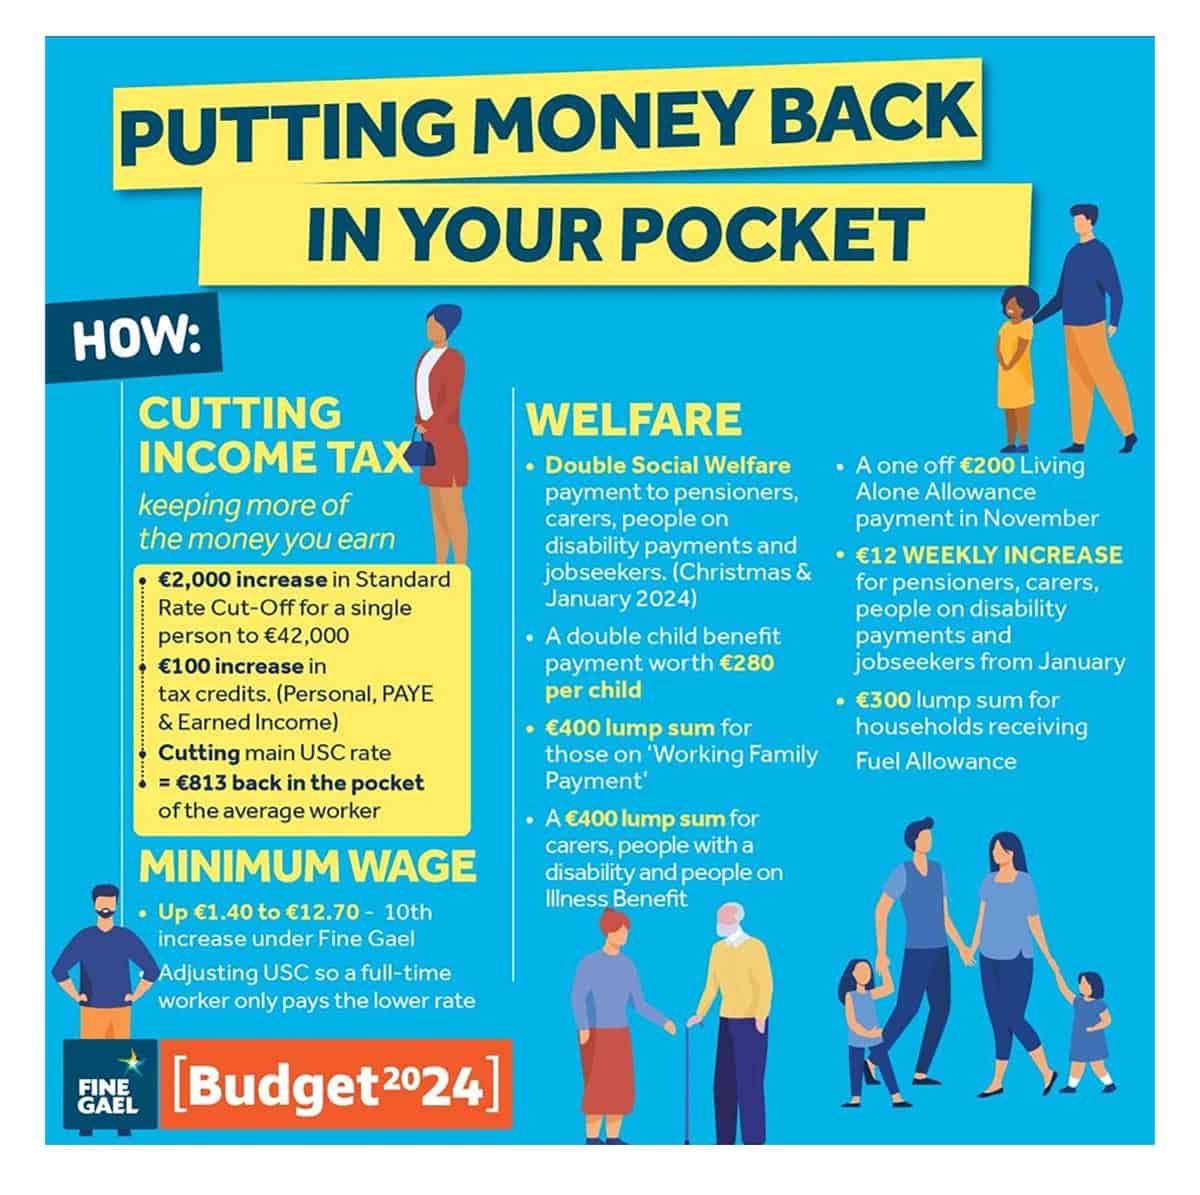 Budget 2024 Putting Money Back In Your Pocket